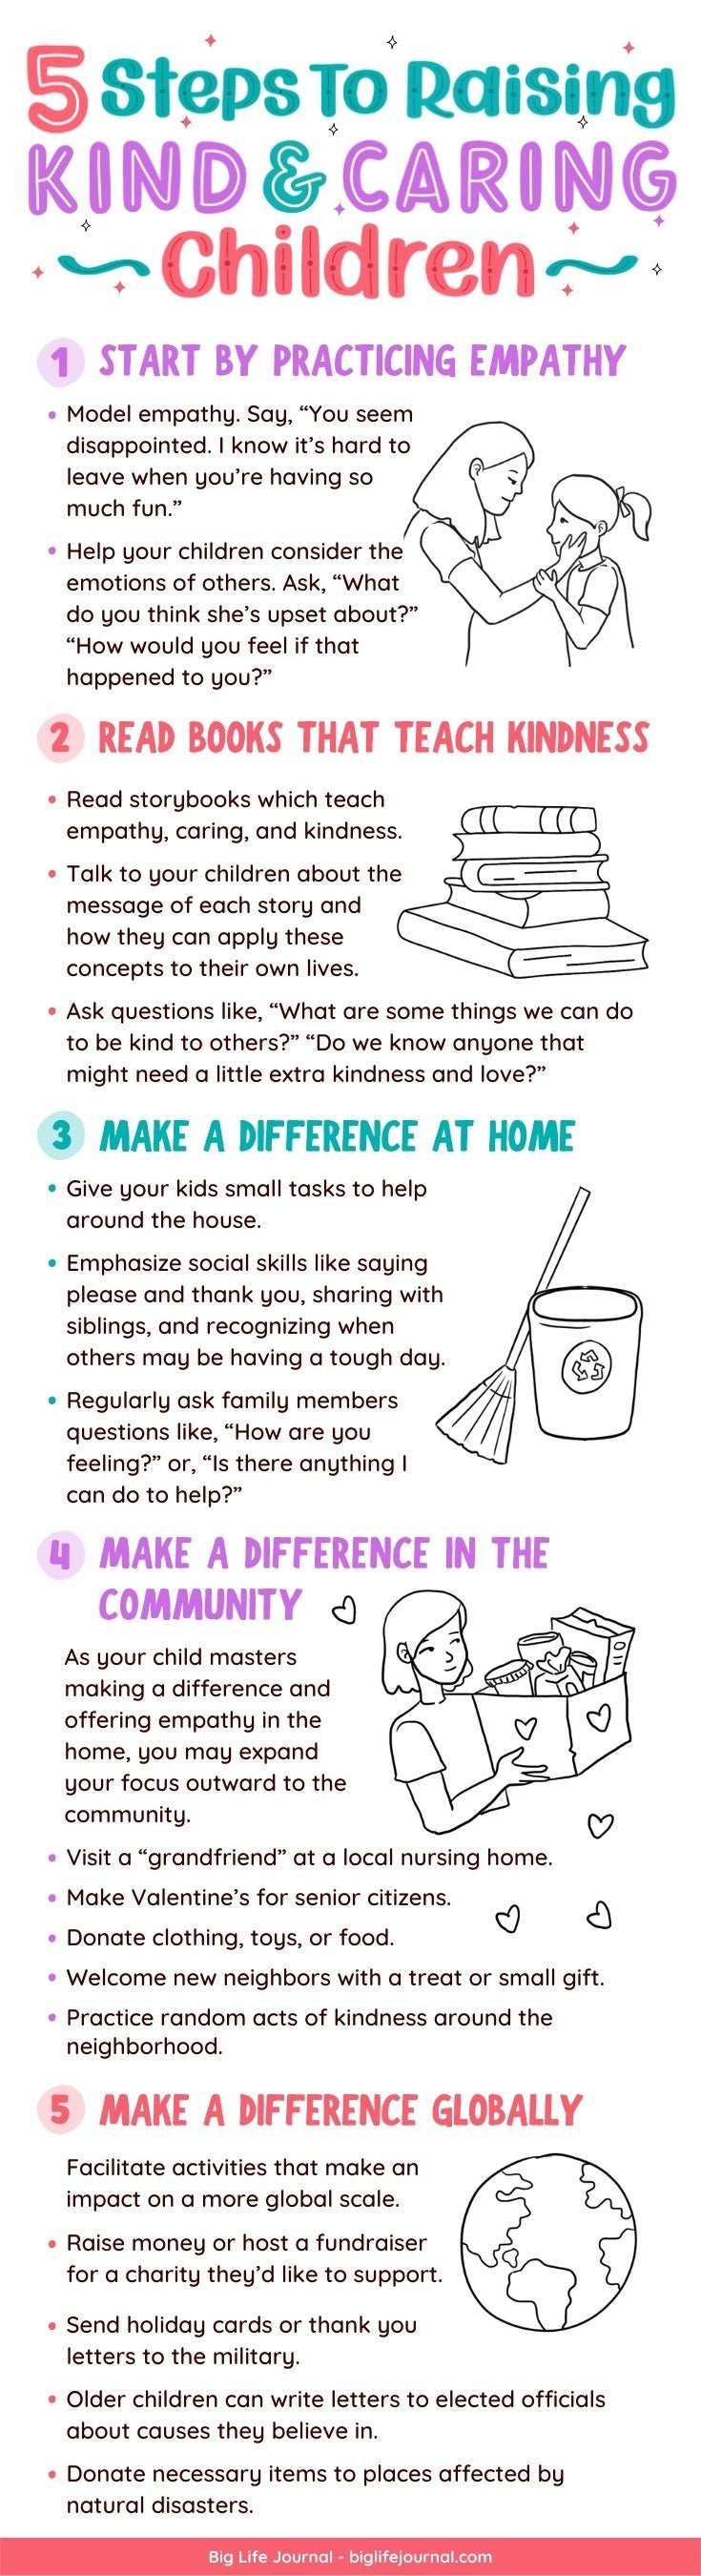 5 Steps to Raising Kind and Caring Children